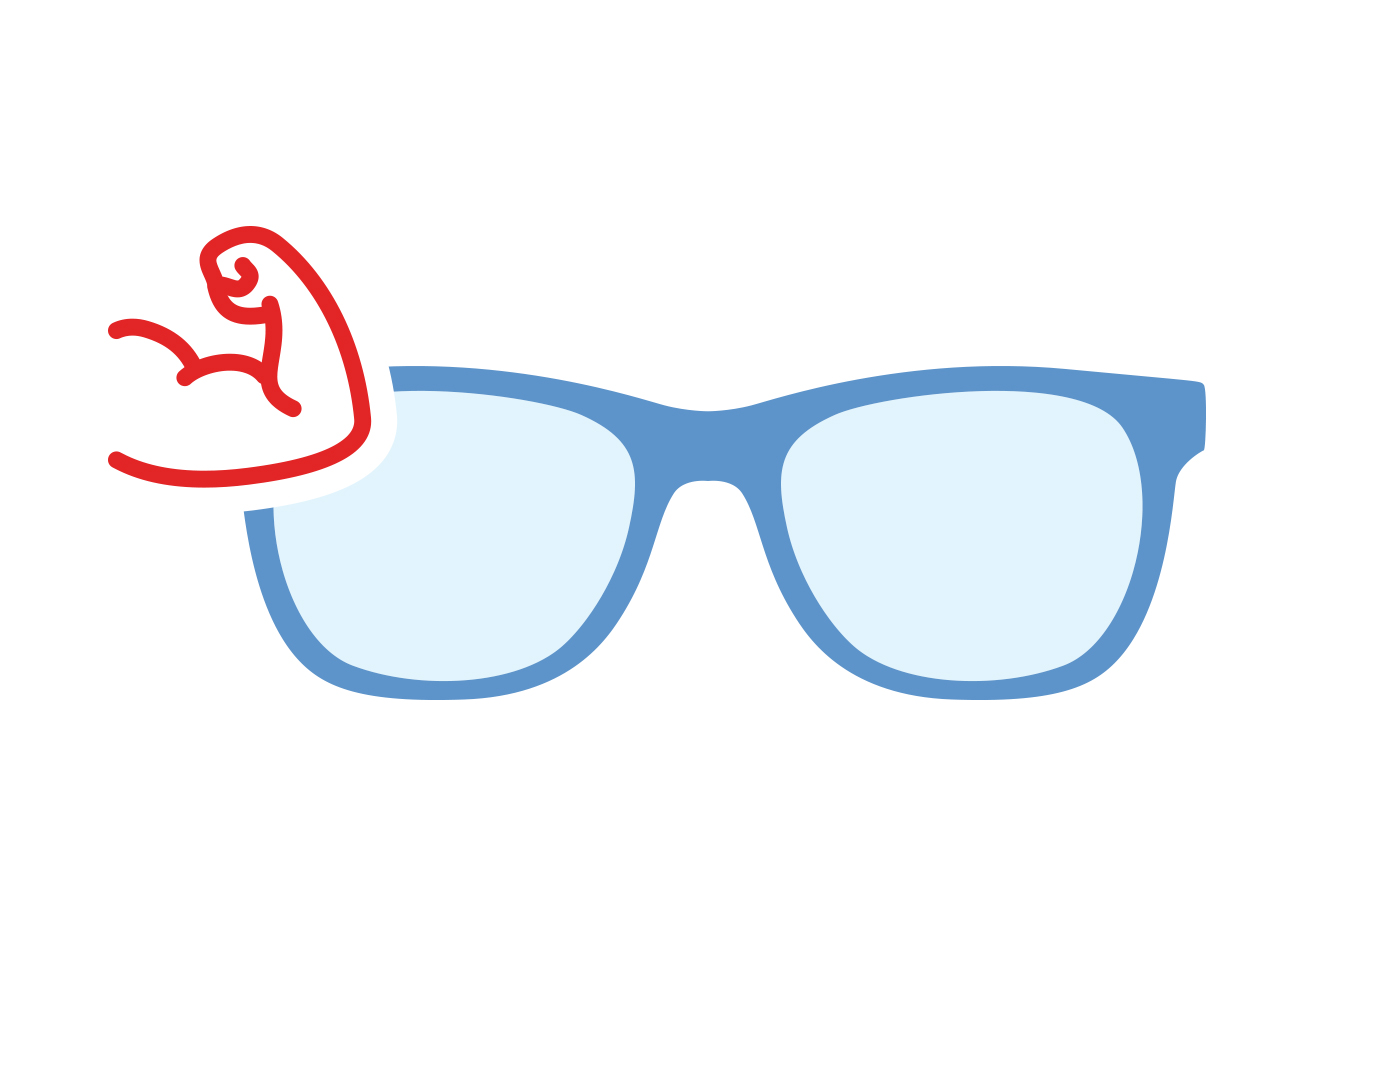 Icon of glasses with strong and durable lenses